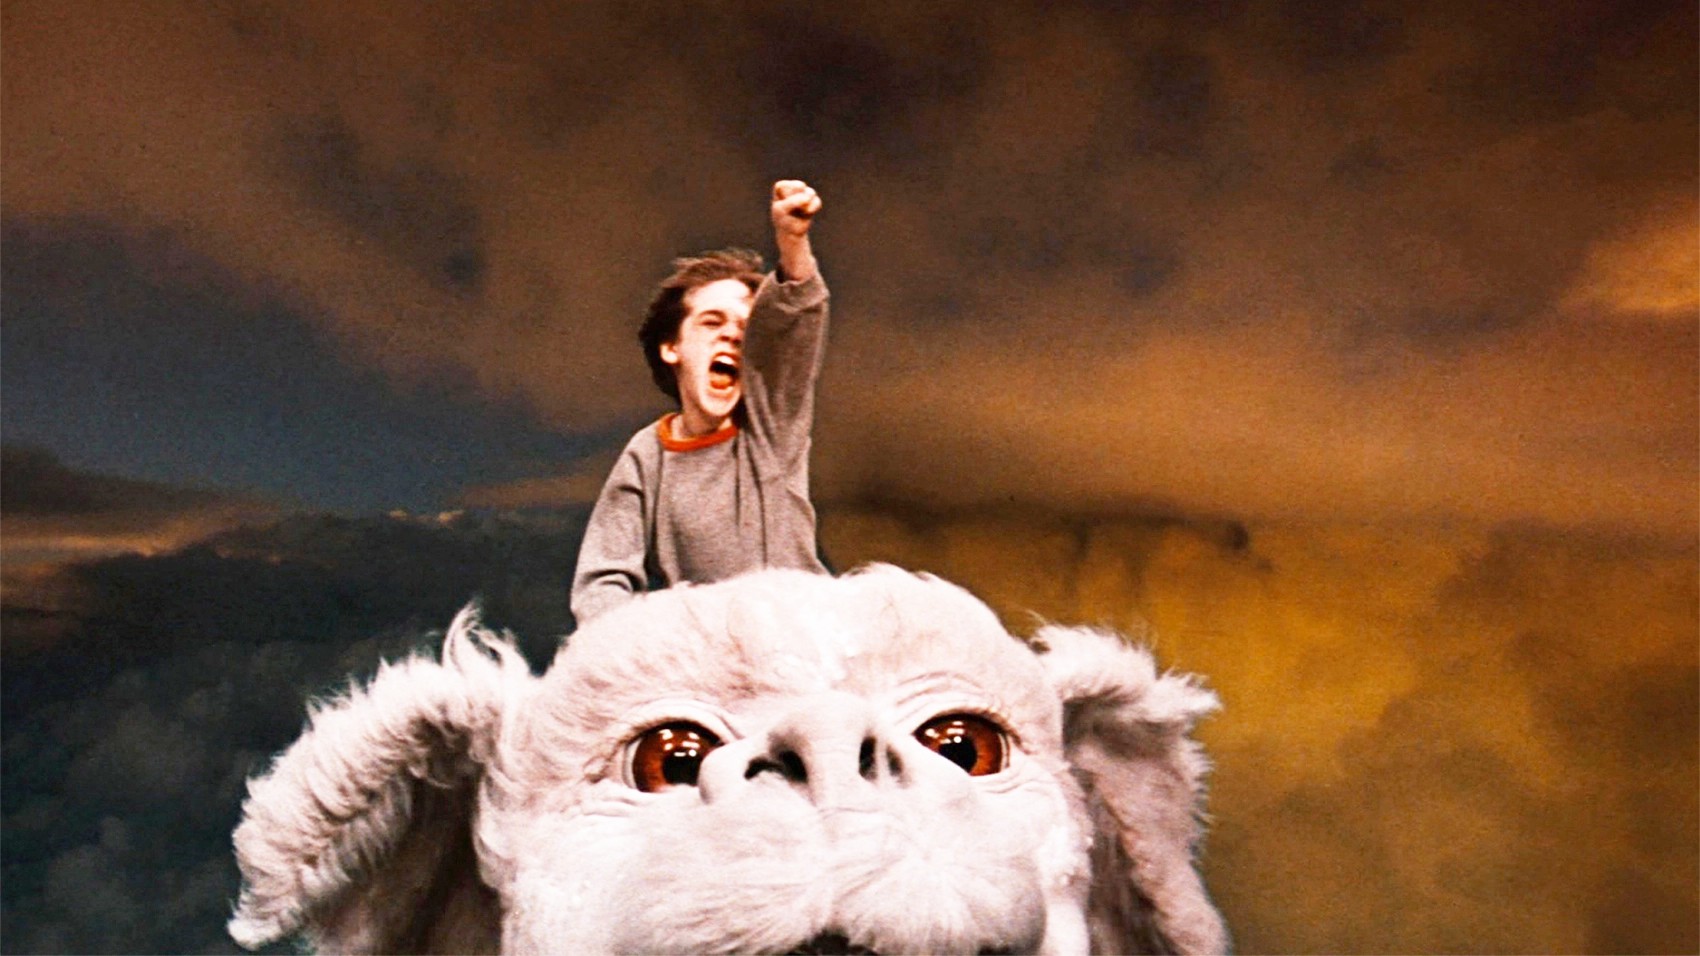 Will The NeverEnding Story Get Another Sequel?